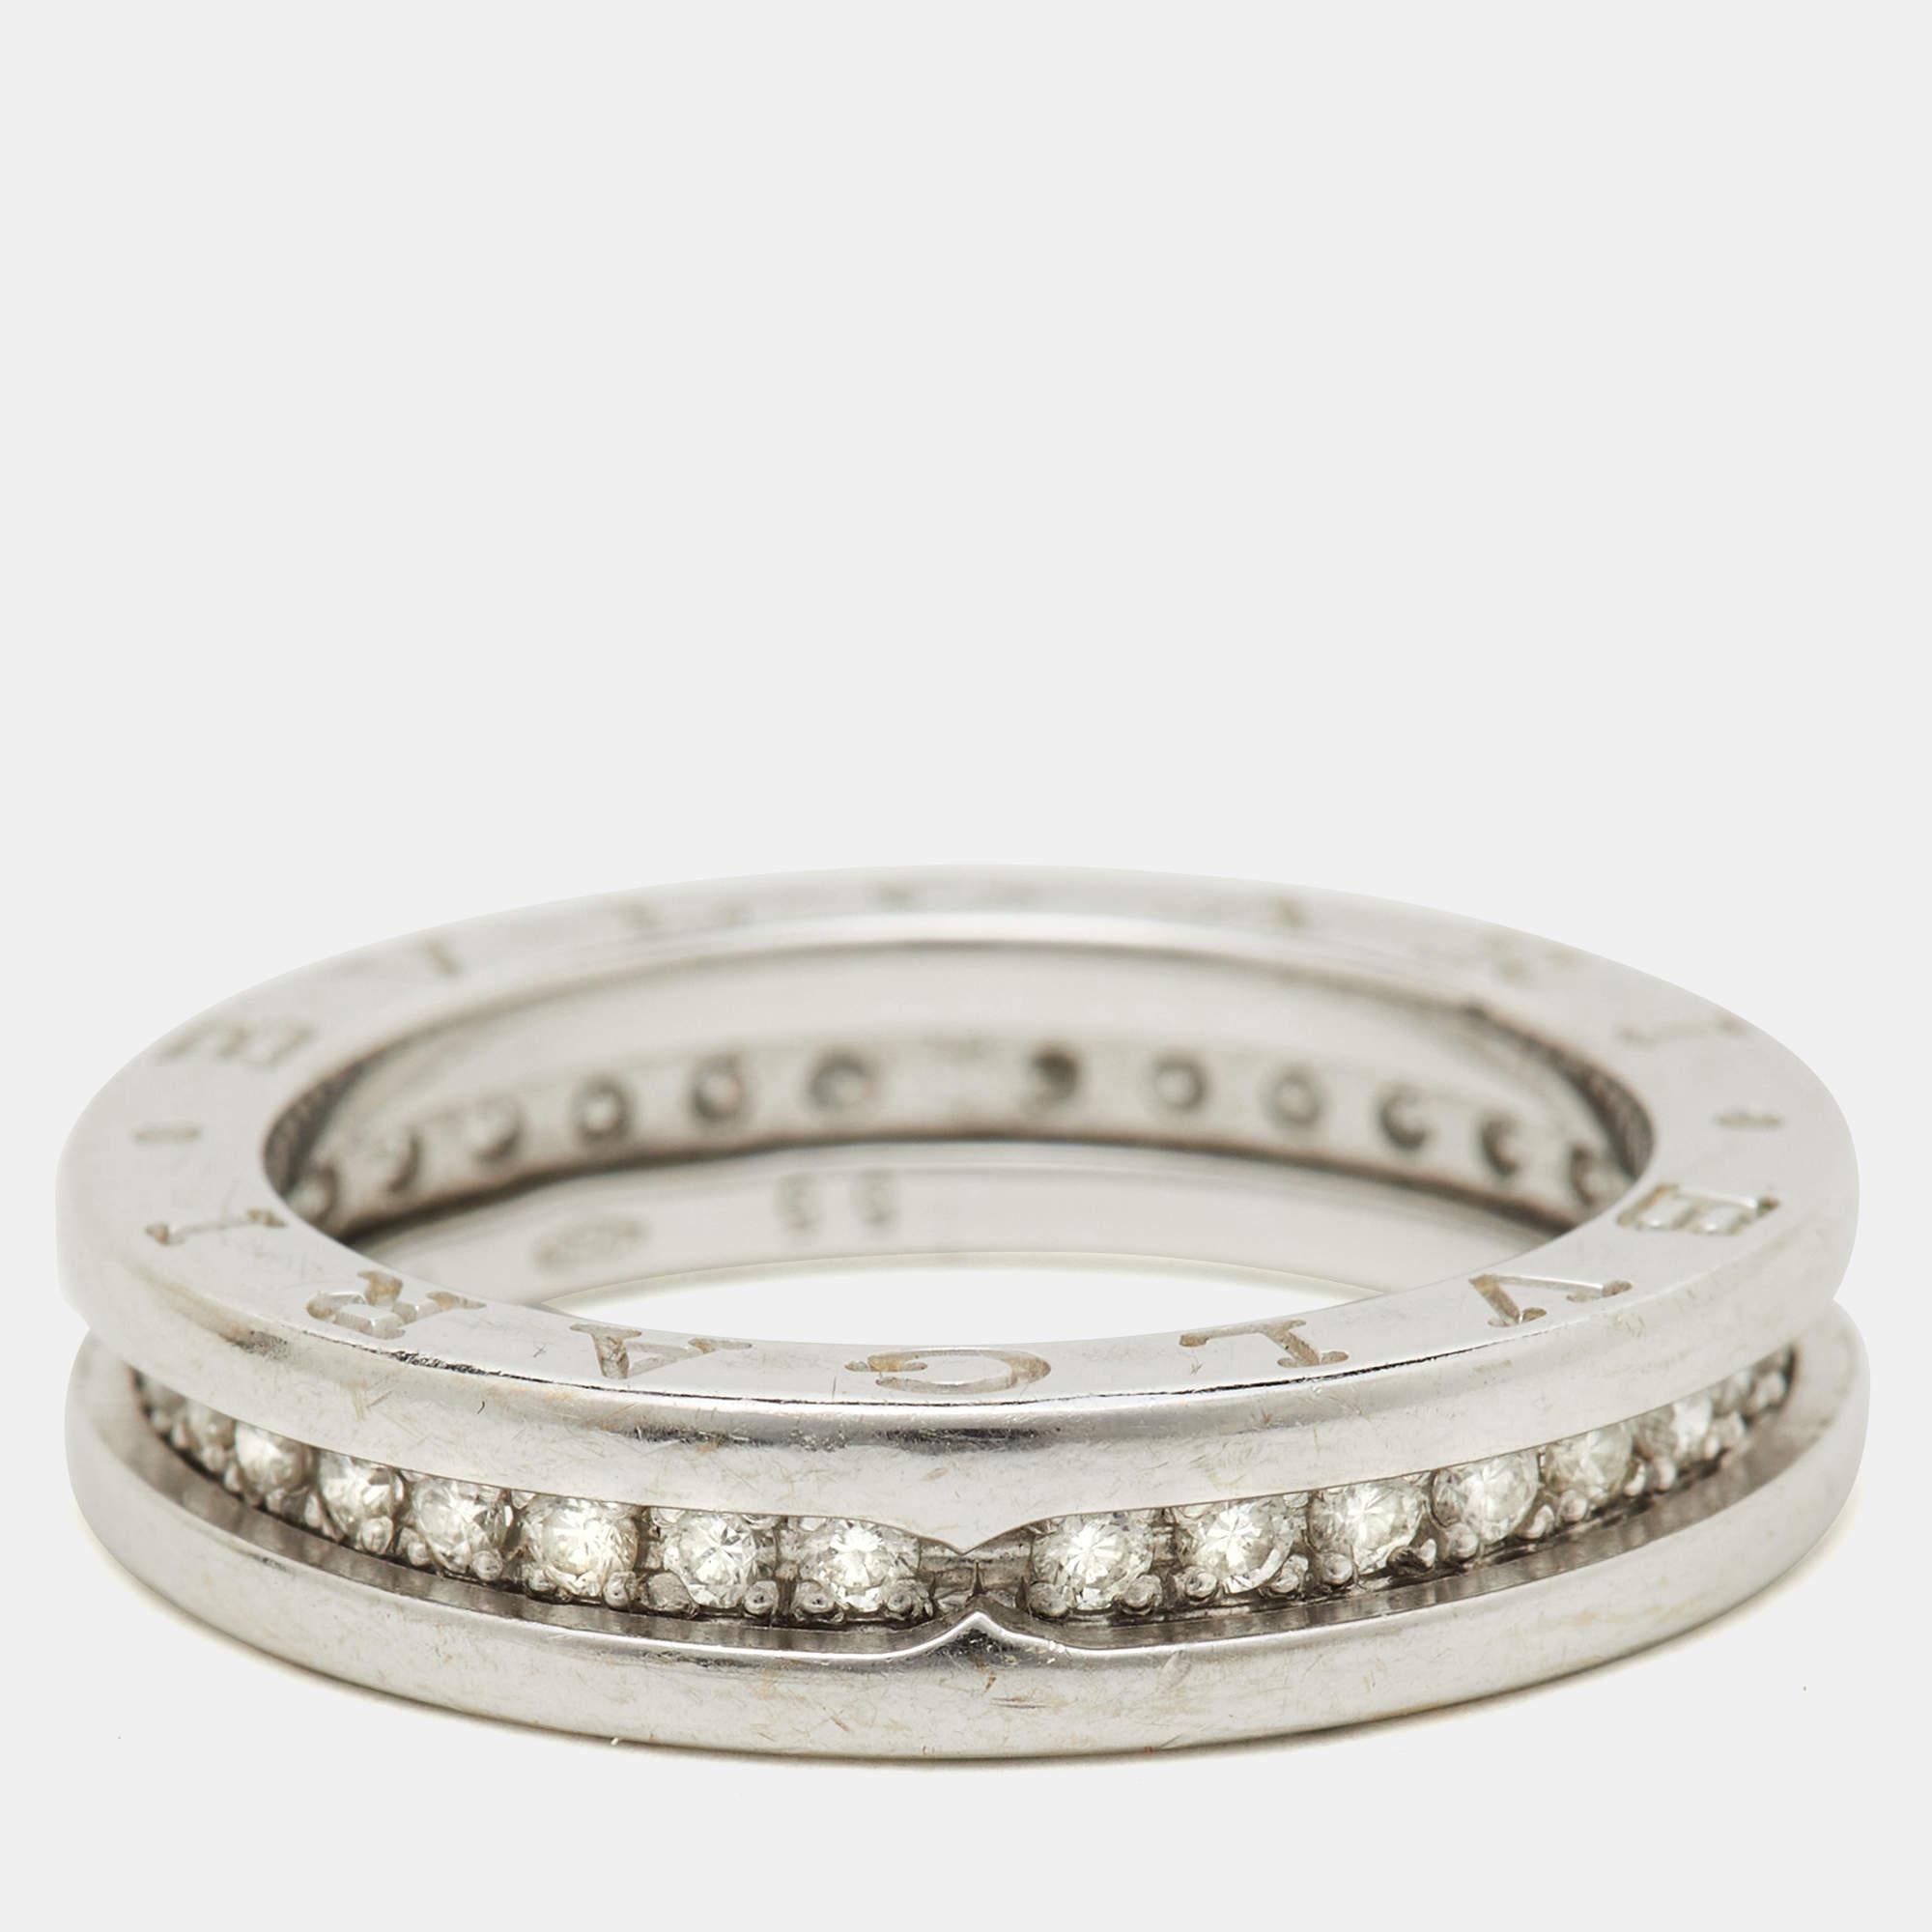 This stunning ring from Bvlgari features notable engravings. Added with diamonds in a design that merges modernity with eternity, this ring is crafted from 18k white gold and shines beautifully.

Includes
Brand Case, Authenticity Card